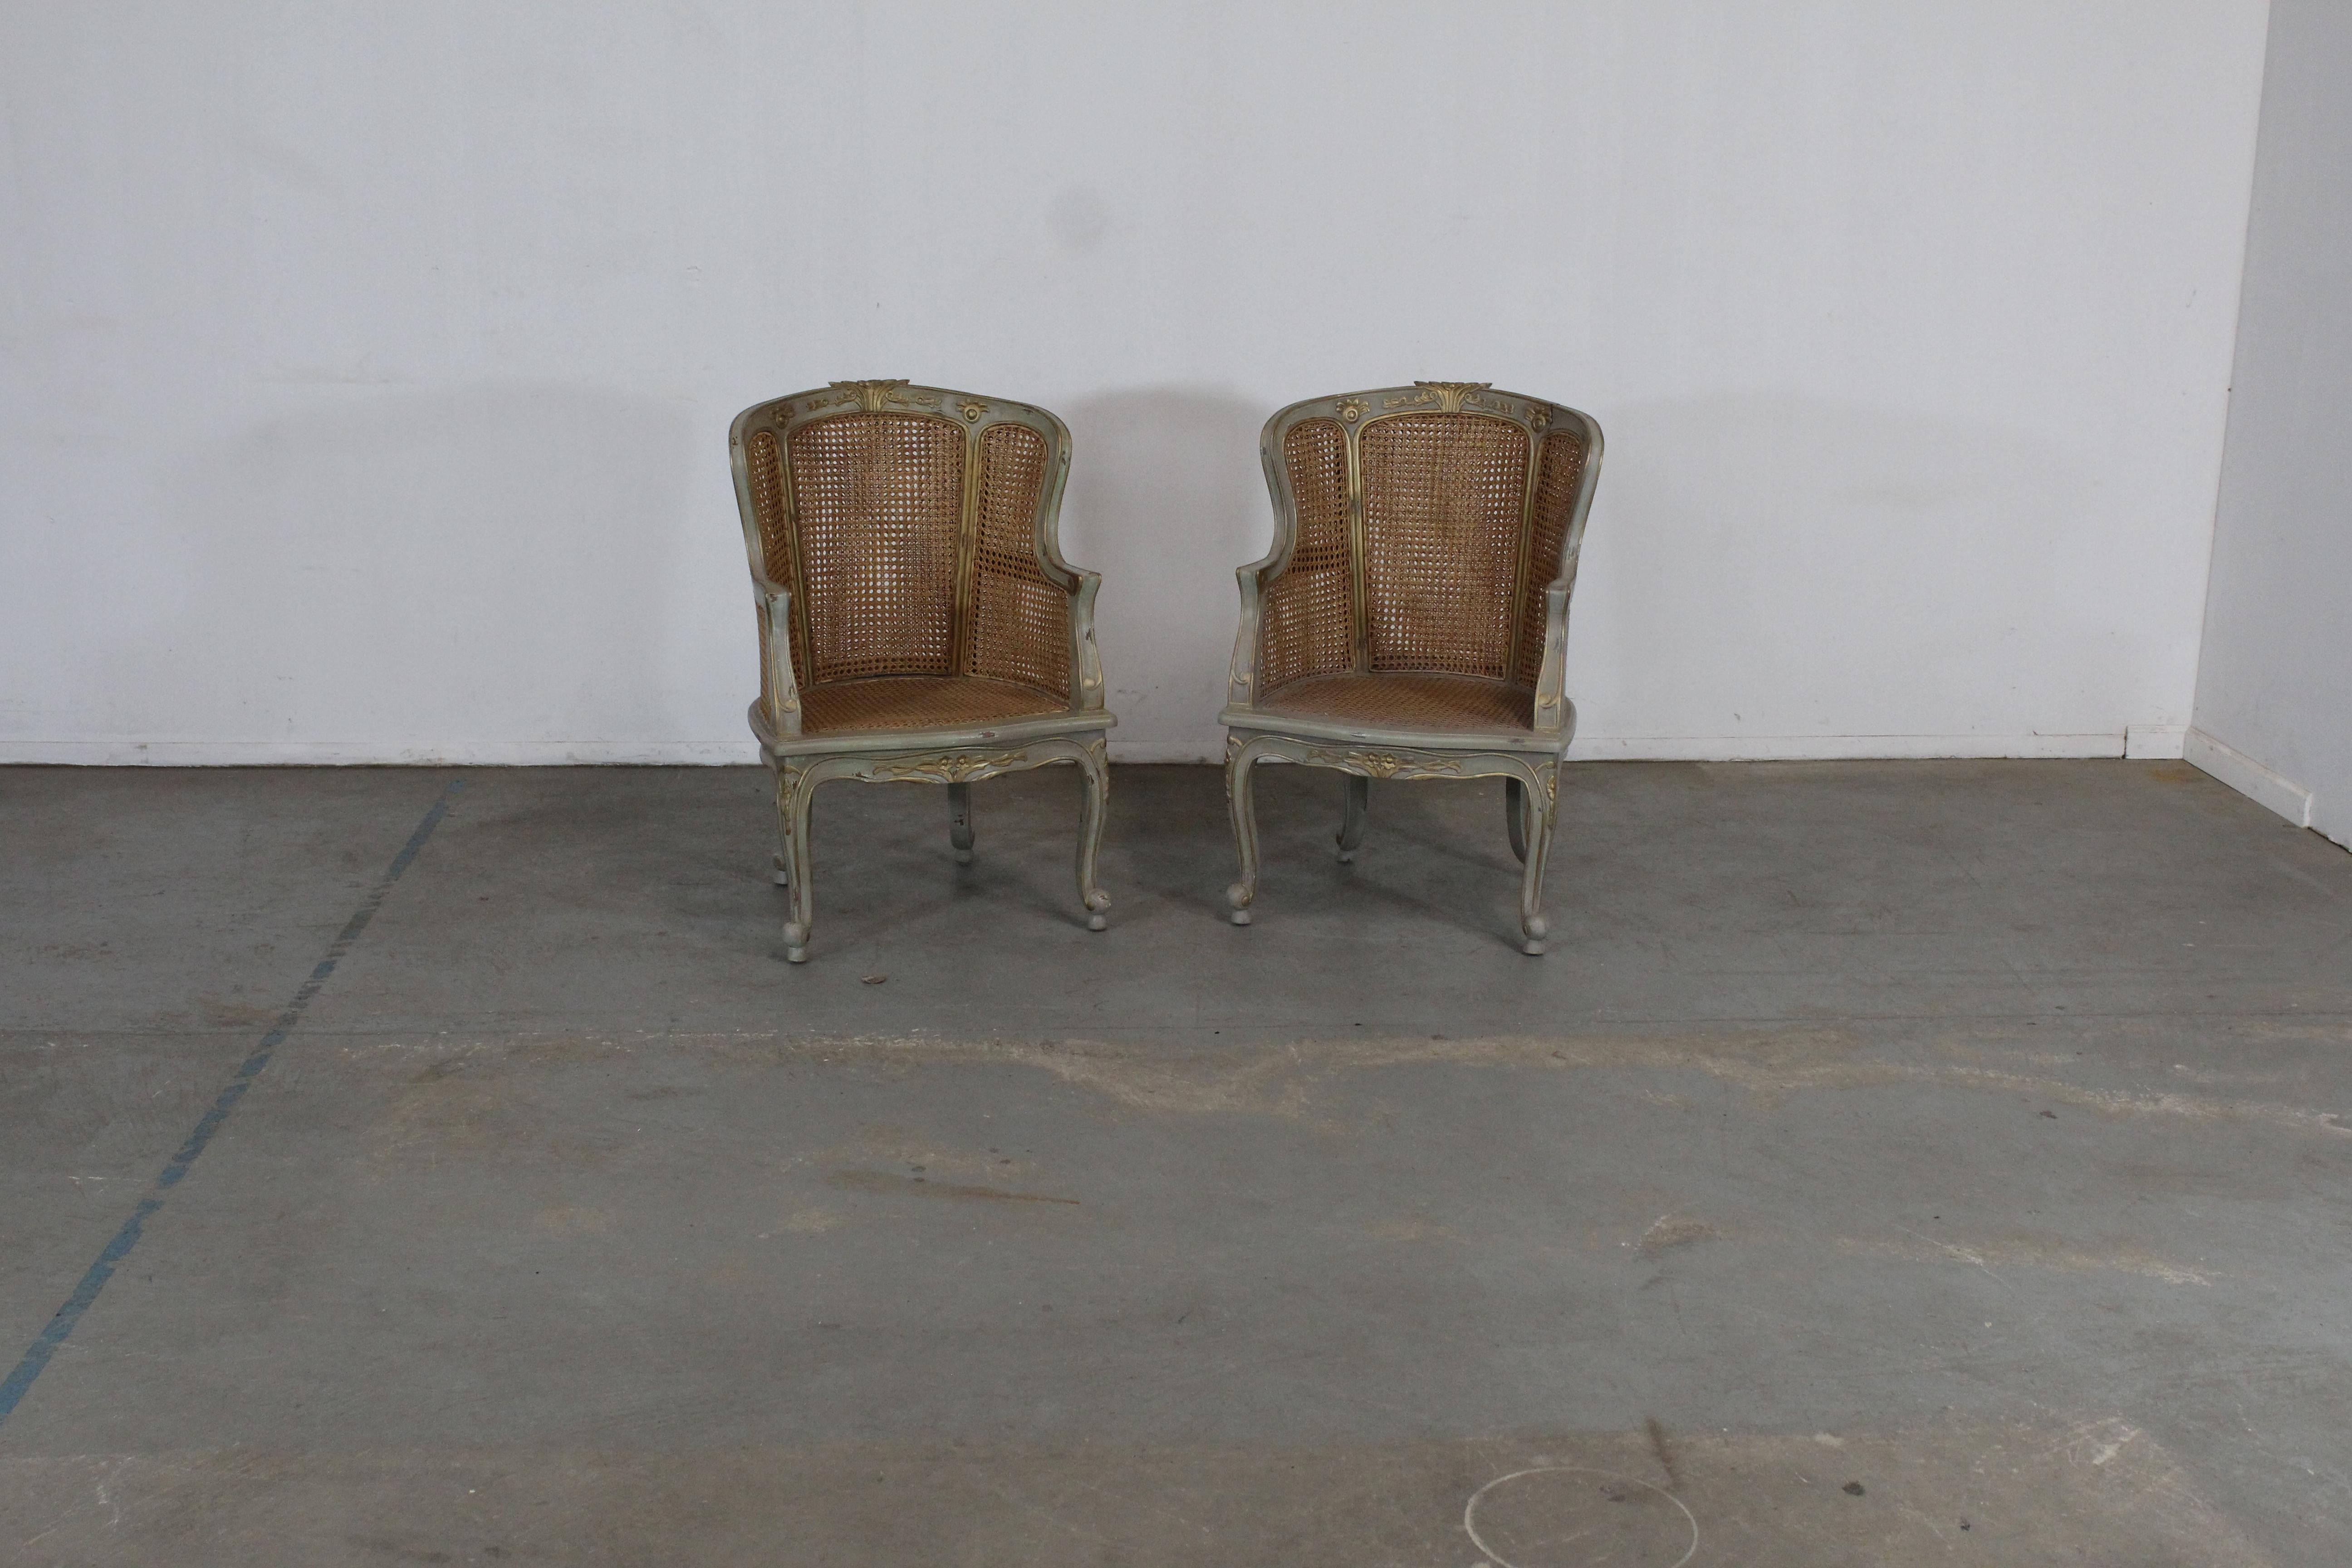 Pair of country French caned arm chairs

Offered is a Pair of Country French Caned Arm Chairs on carved legs. They are in good condition - caning is all good(no noticeable stains or tears 1 chair shows a seem separation- maybe intentional to look